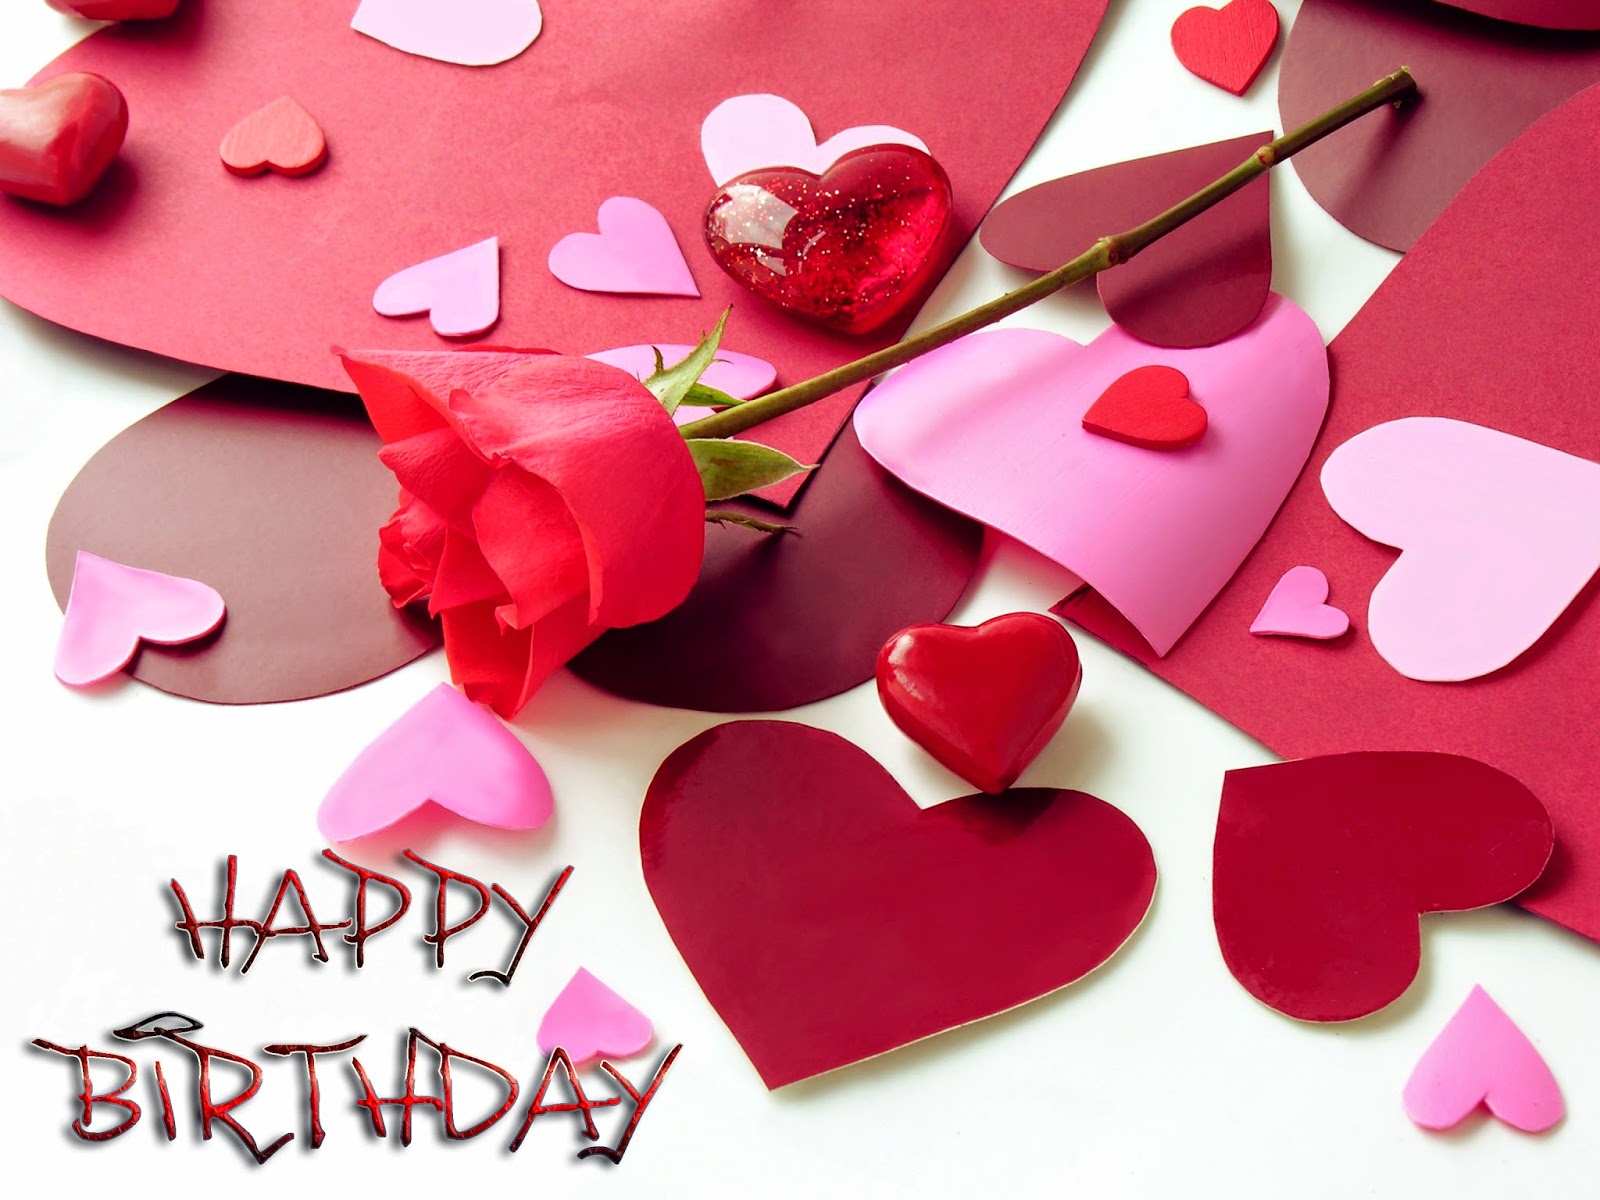 Birthday Wallpaper With Red Roses - Love Happy Birthday Image Hd , HD Wallpaper & Backgrounds